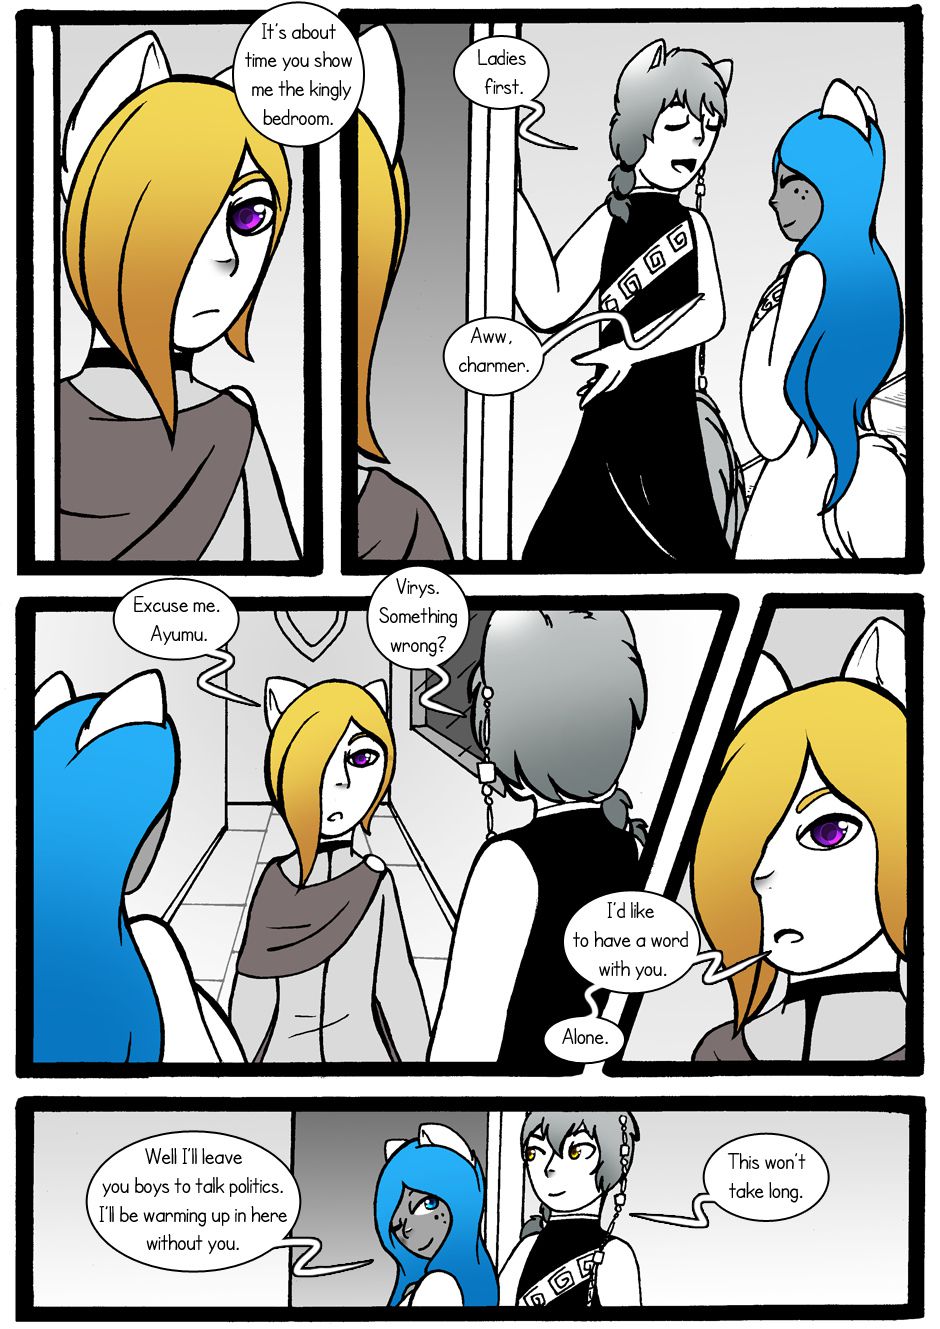 [Jeny-jen94] Between Kings and Queens [Ongoing] 94